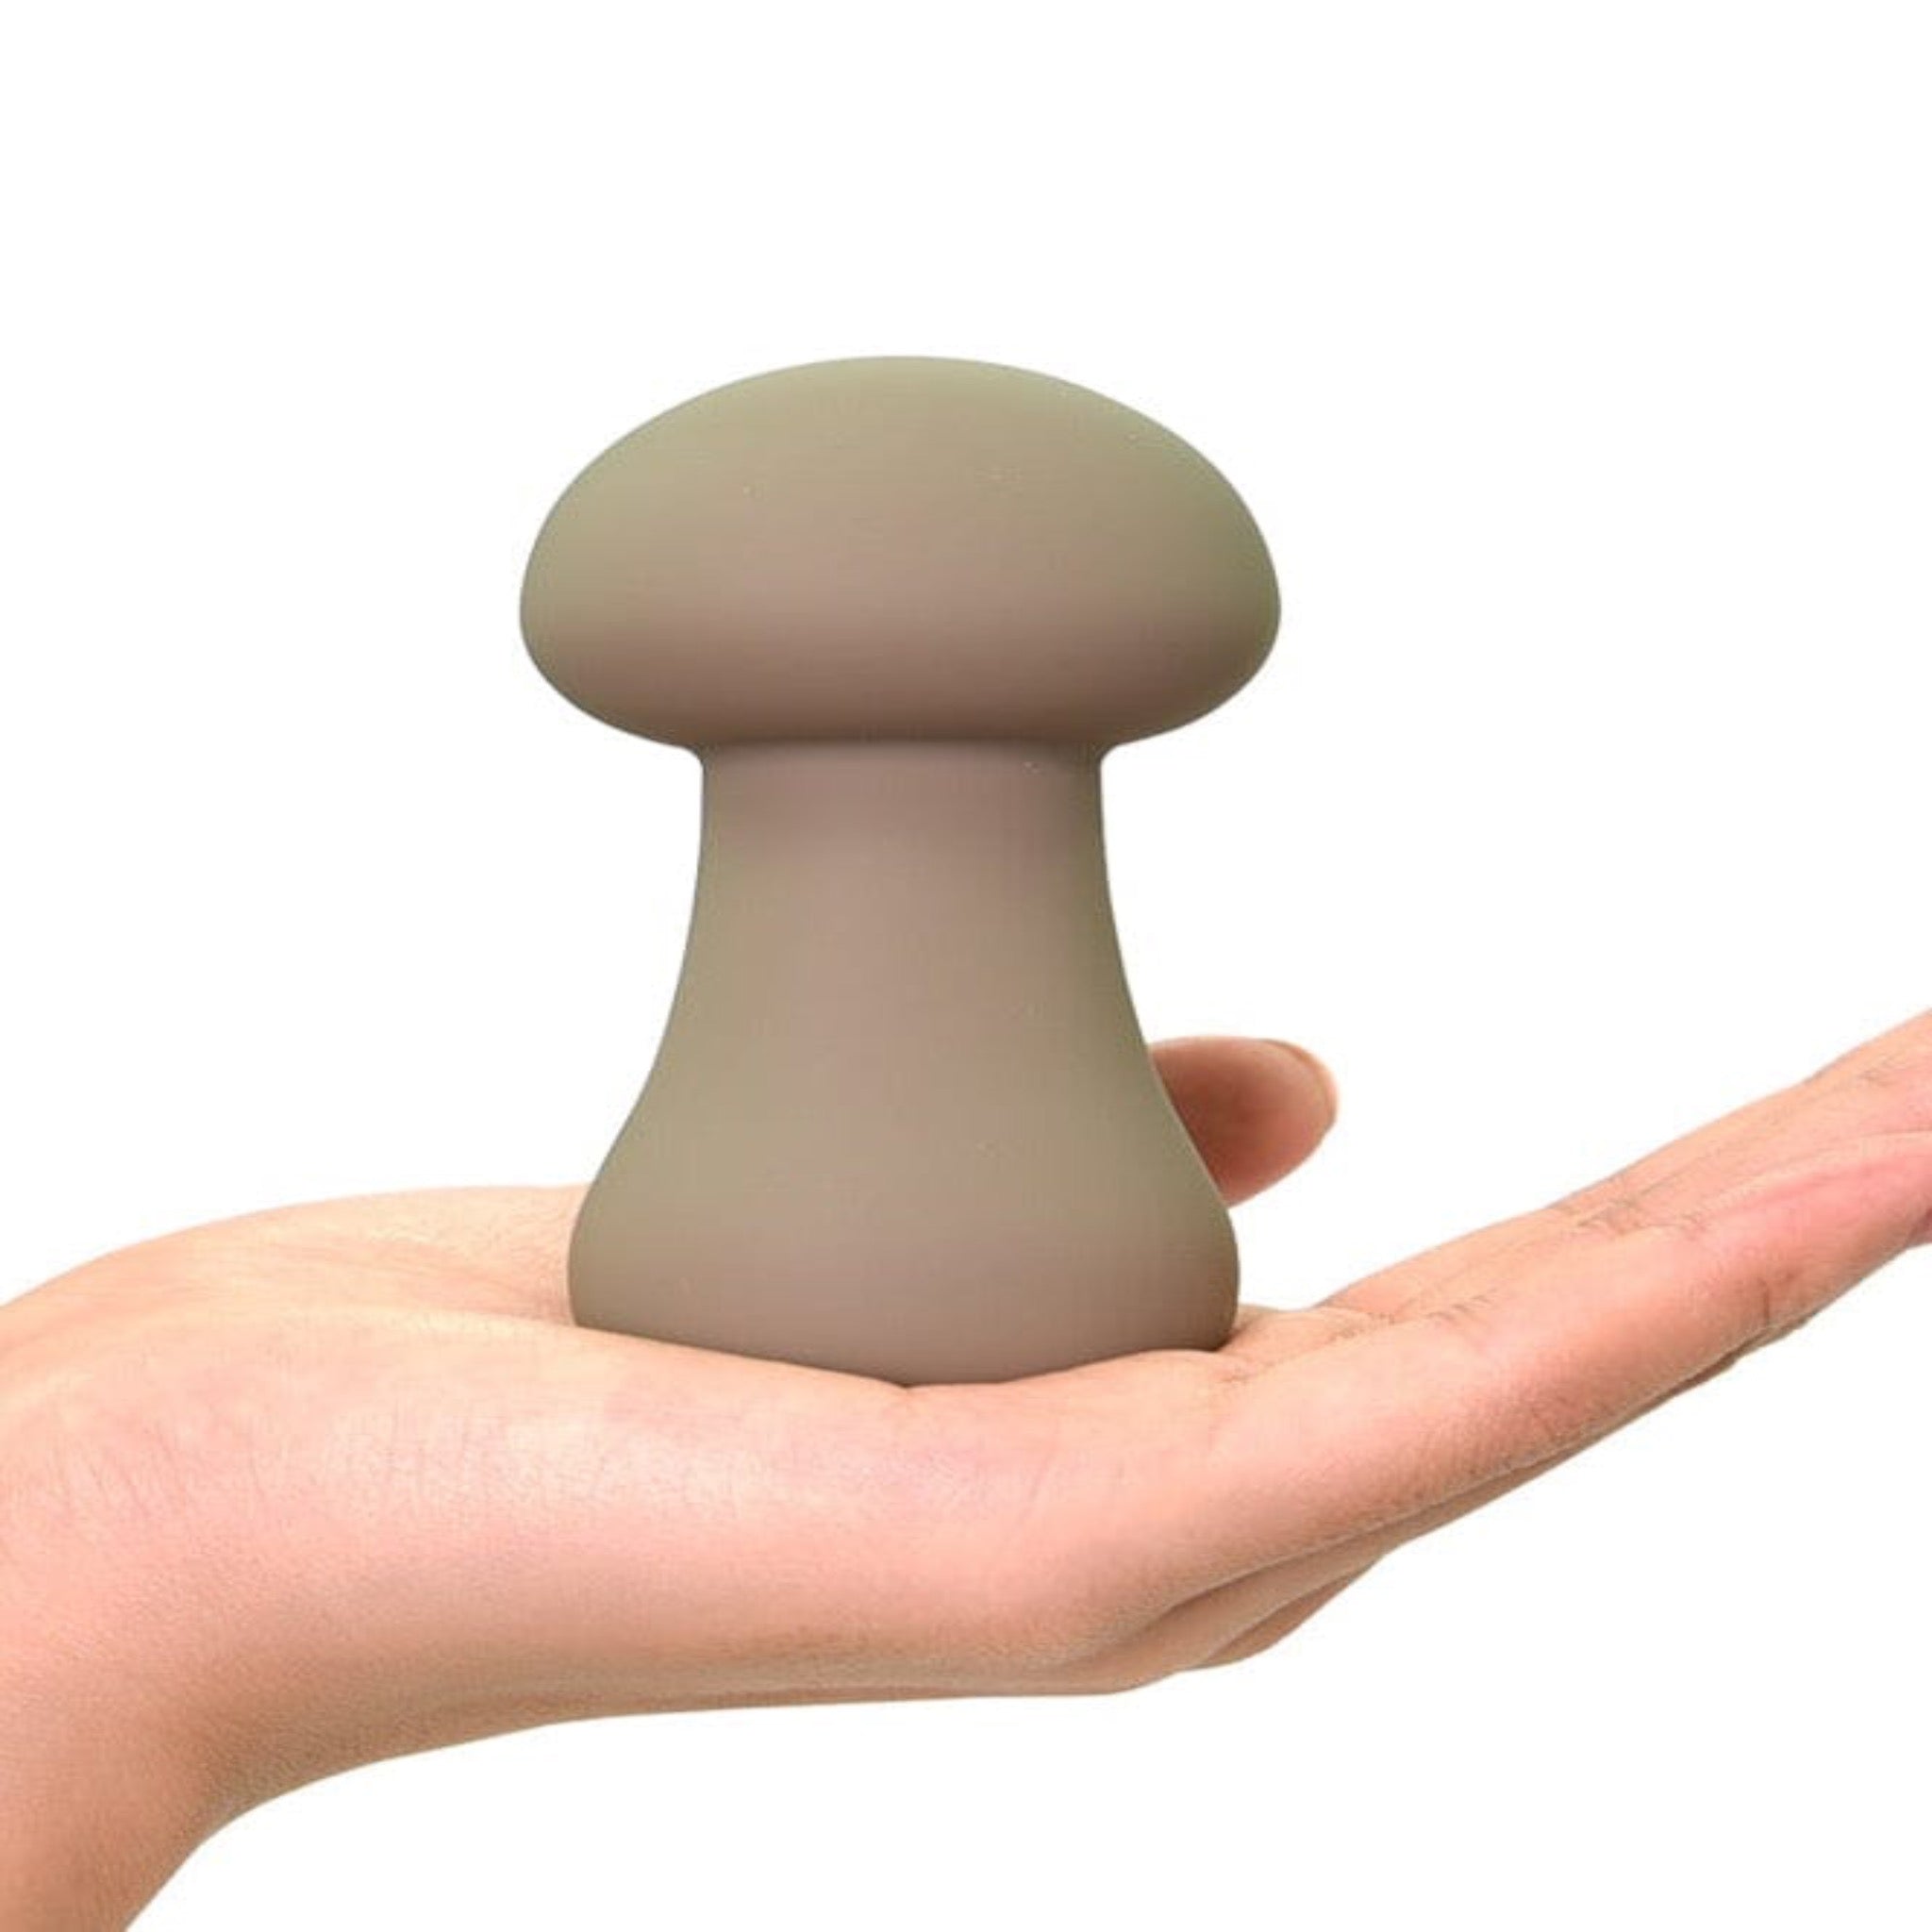 mushroom shaped clitoral vibrator in the palm of a hand